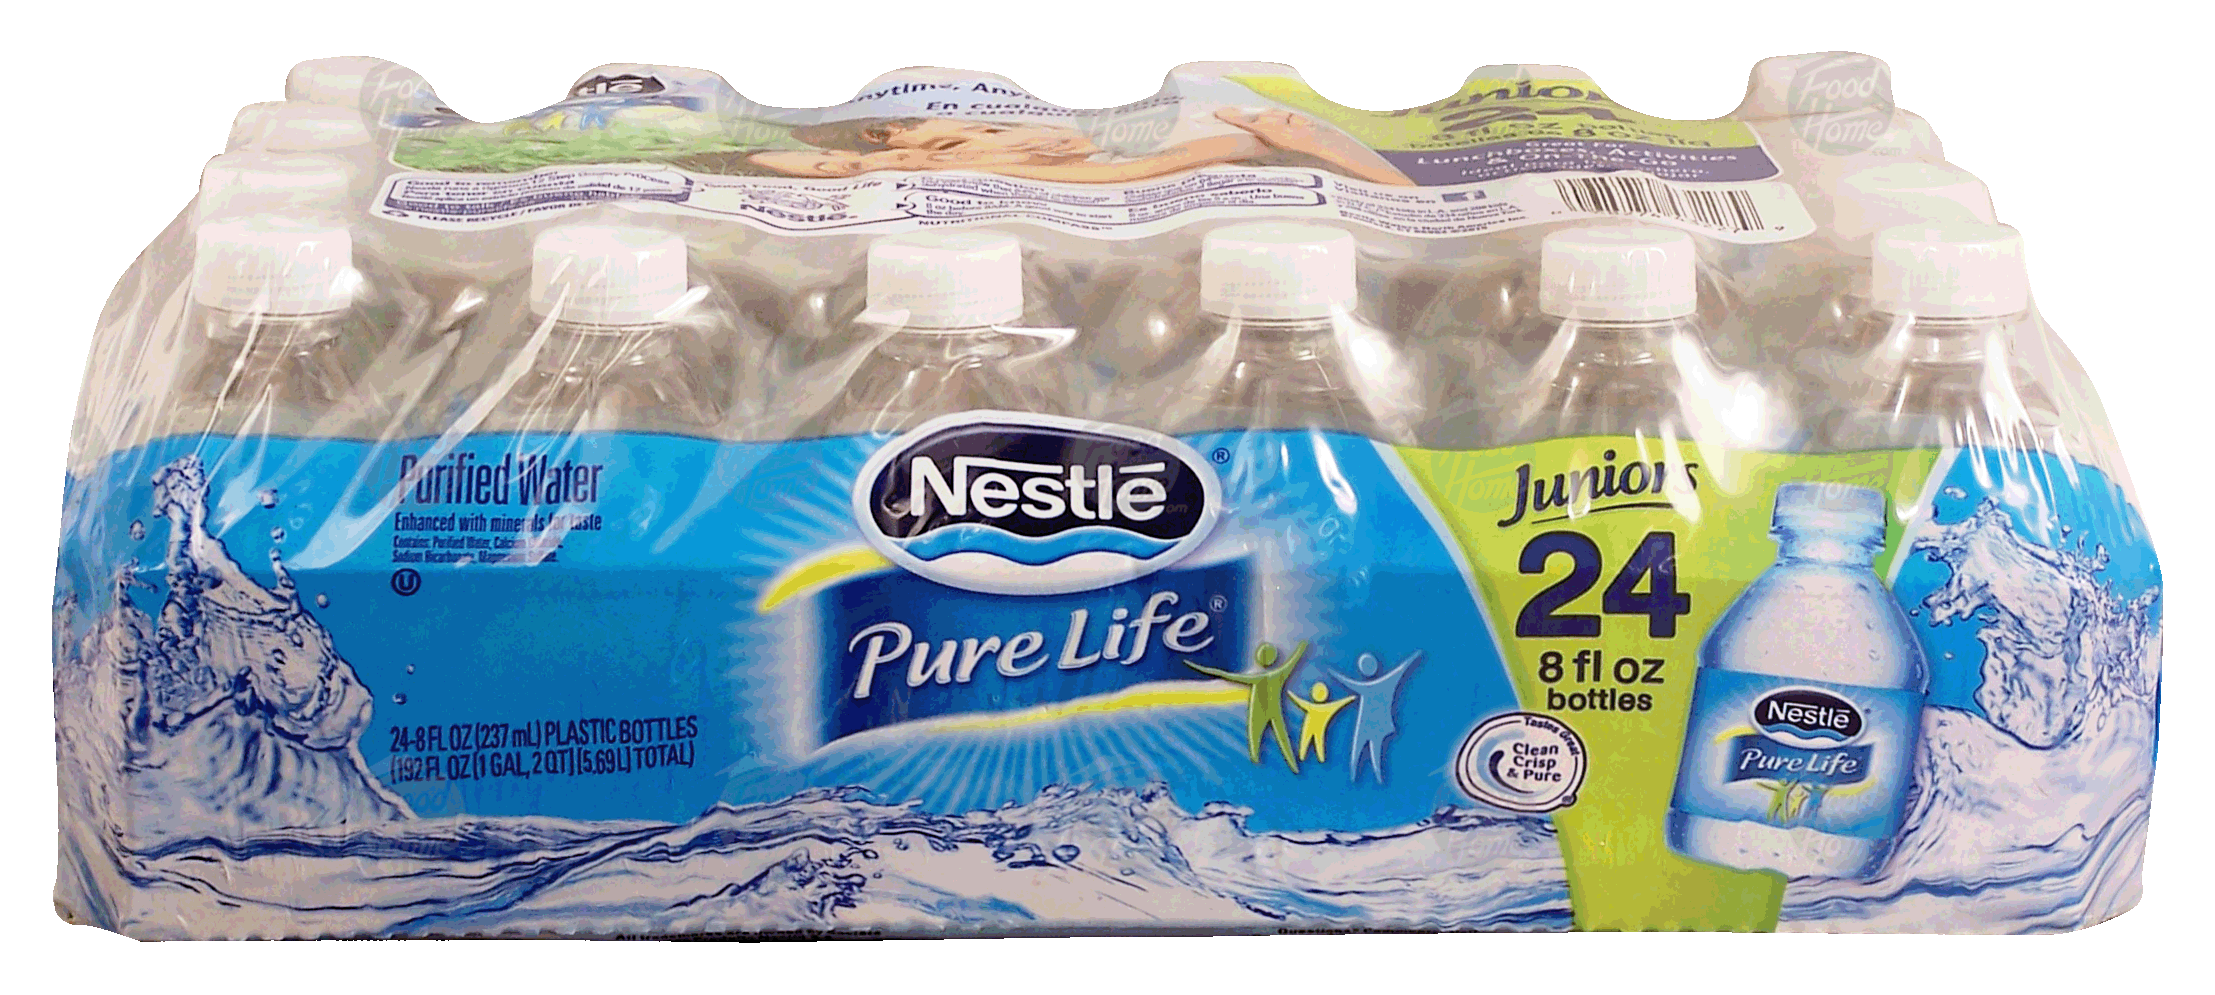 Nestle Pure Life juniors; purified water, 24-8 fl oz bottles Full-Size Picture